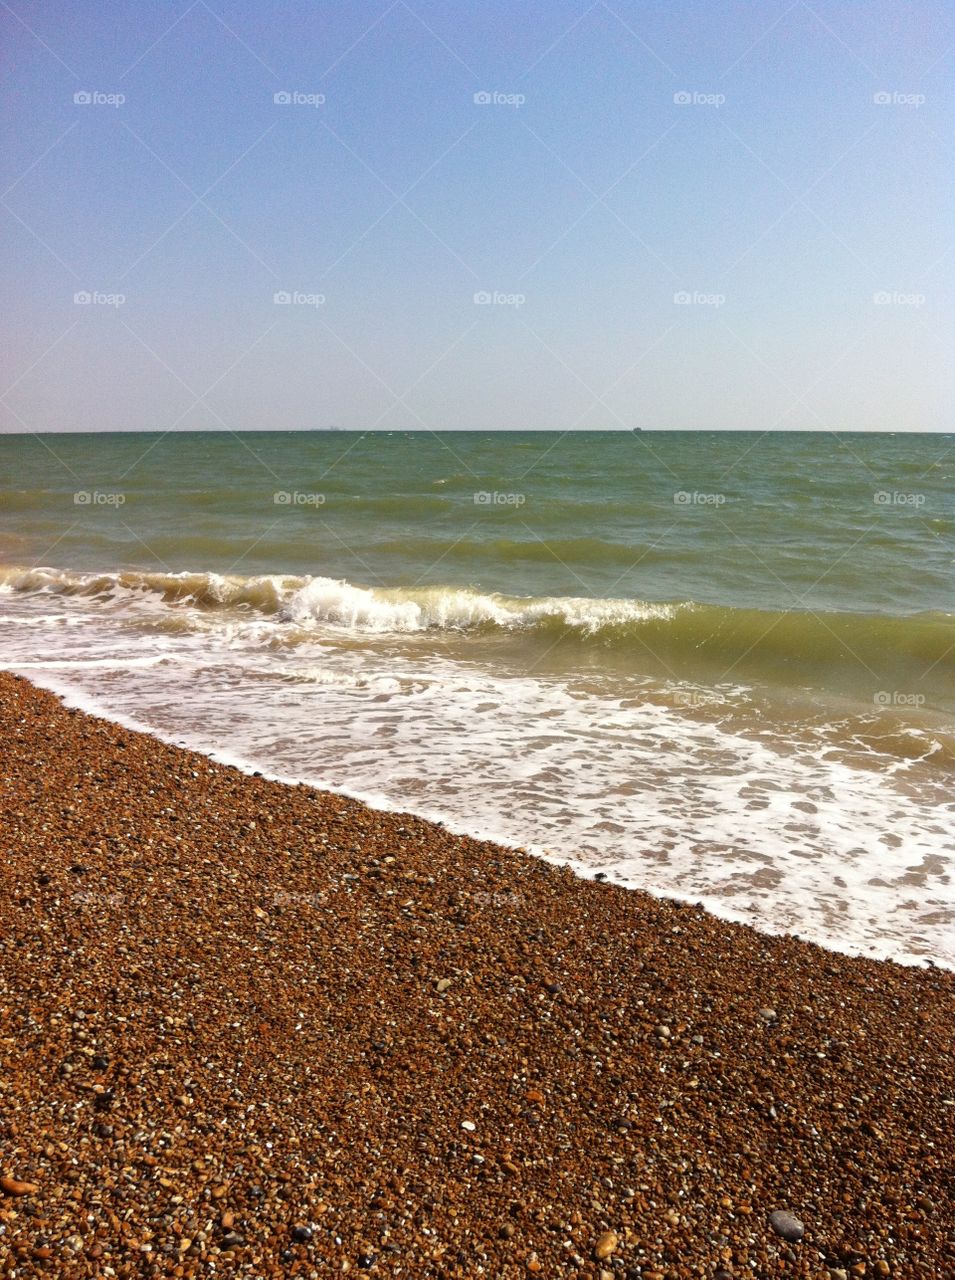 The sea waves roll in washing the stones on the beach, on a clear sunny day in Winchelsea, Sussex.